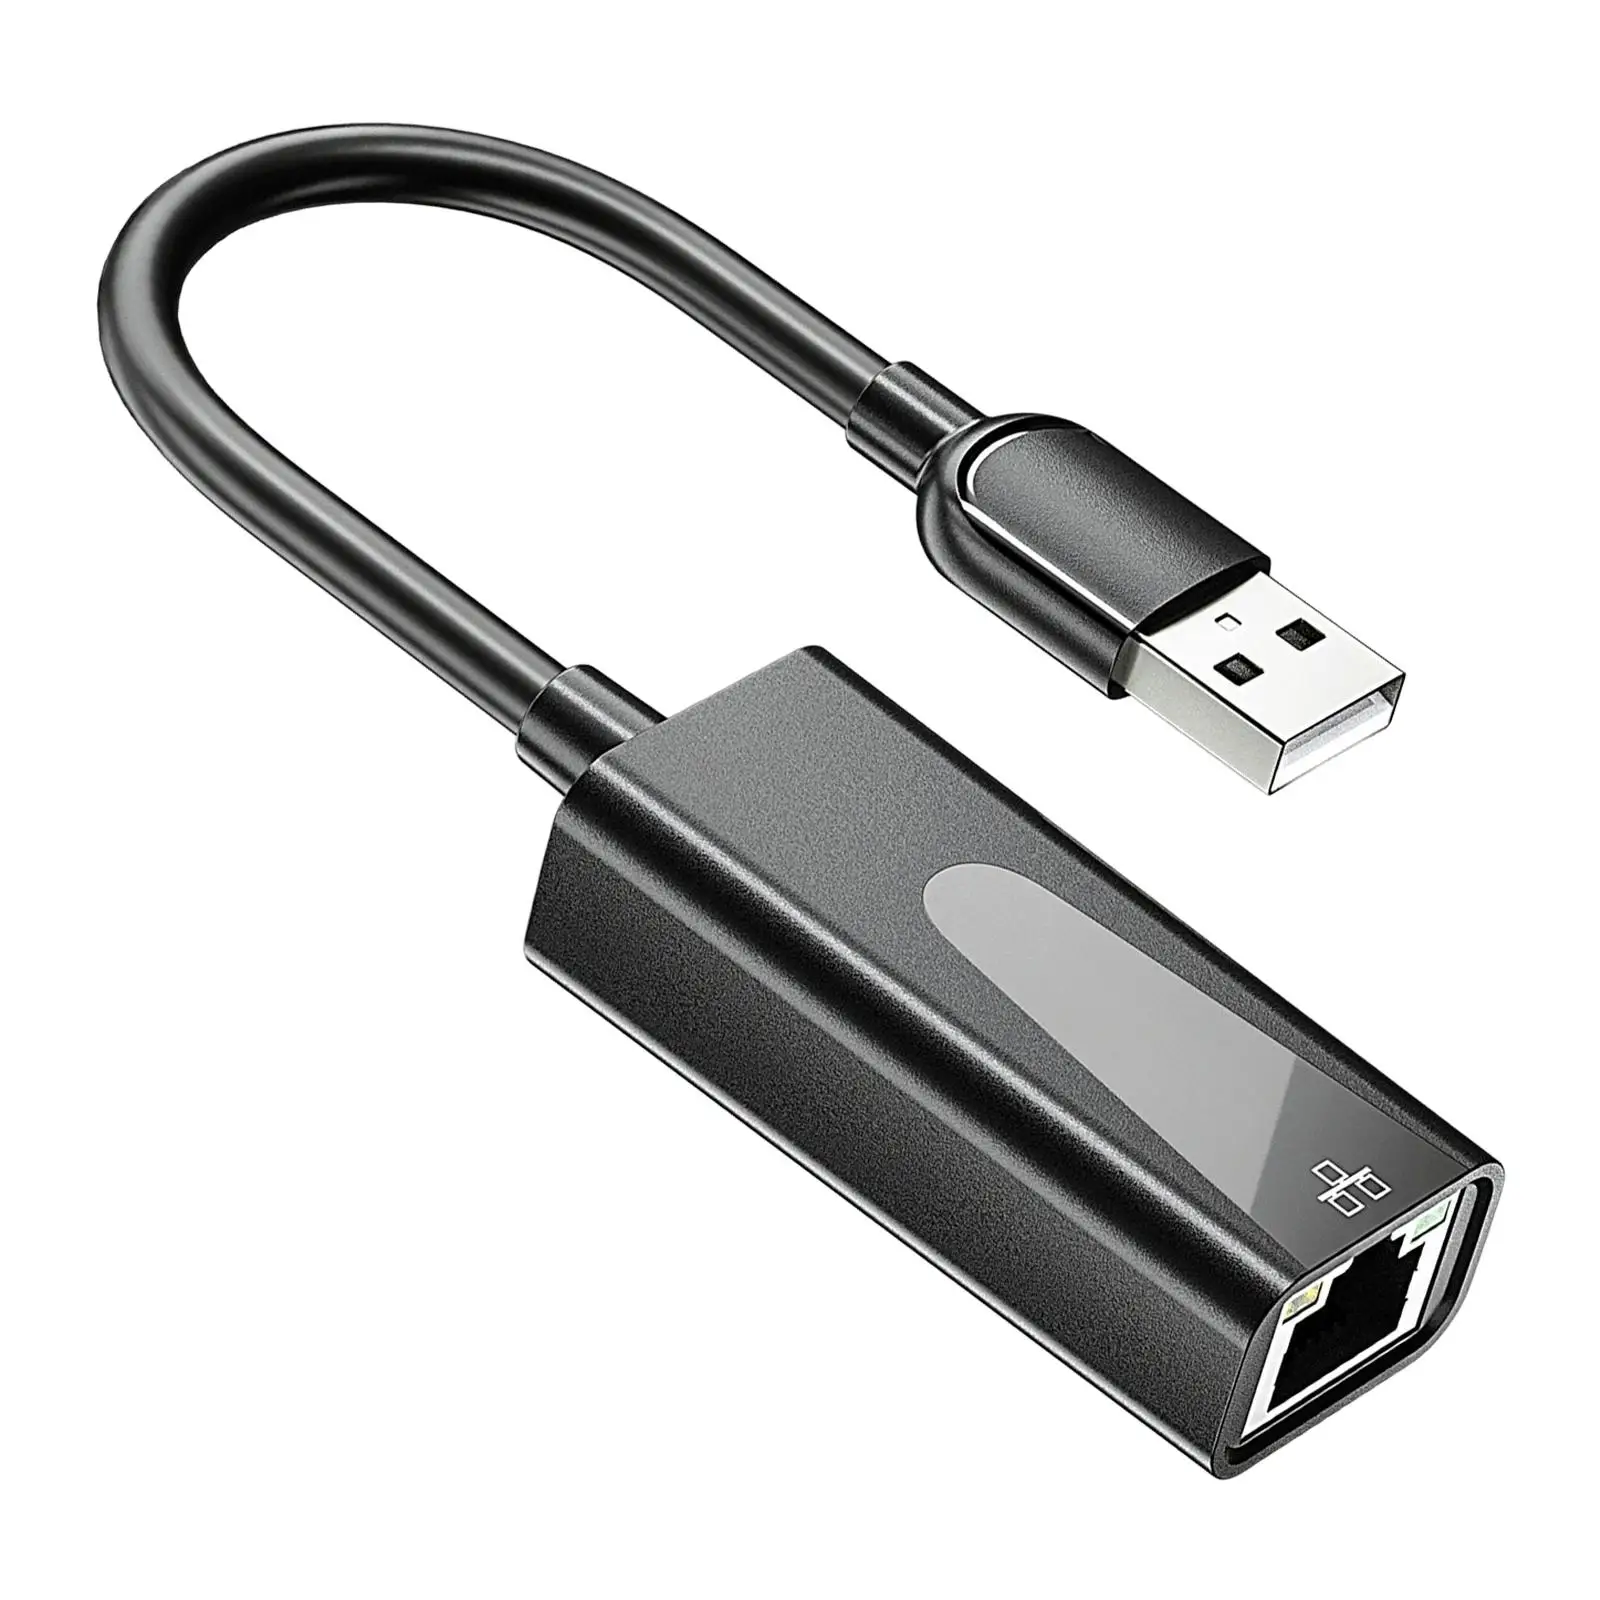 USB Ethernet Adapter Compact Plug and Play Network Adapter Portable 100M Gigabit for Computer Notebook PC Desktop Laptop